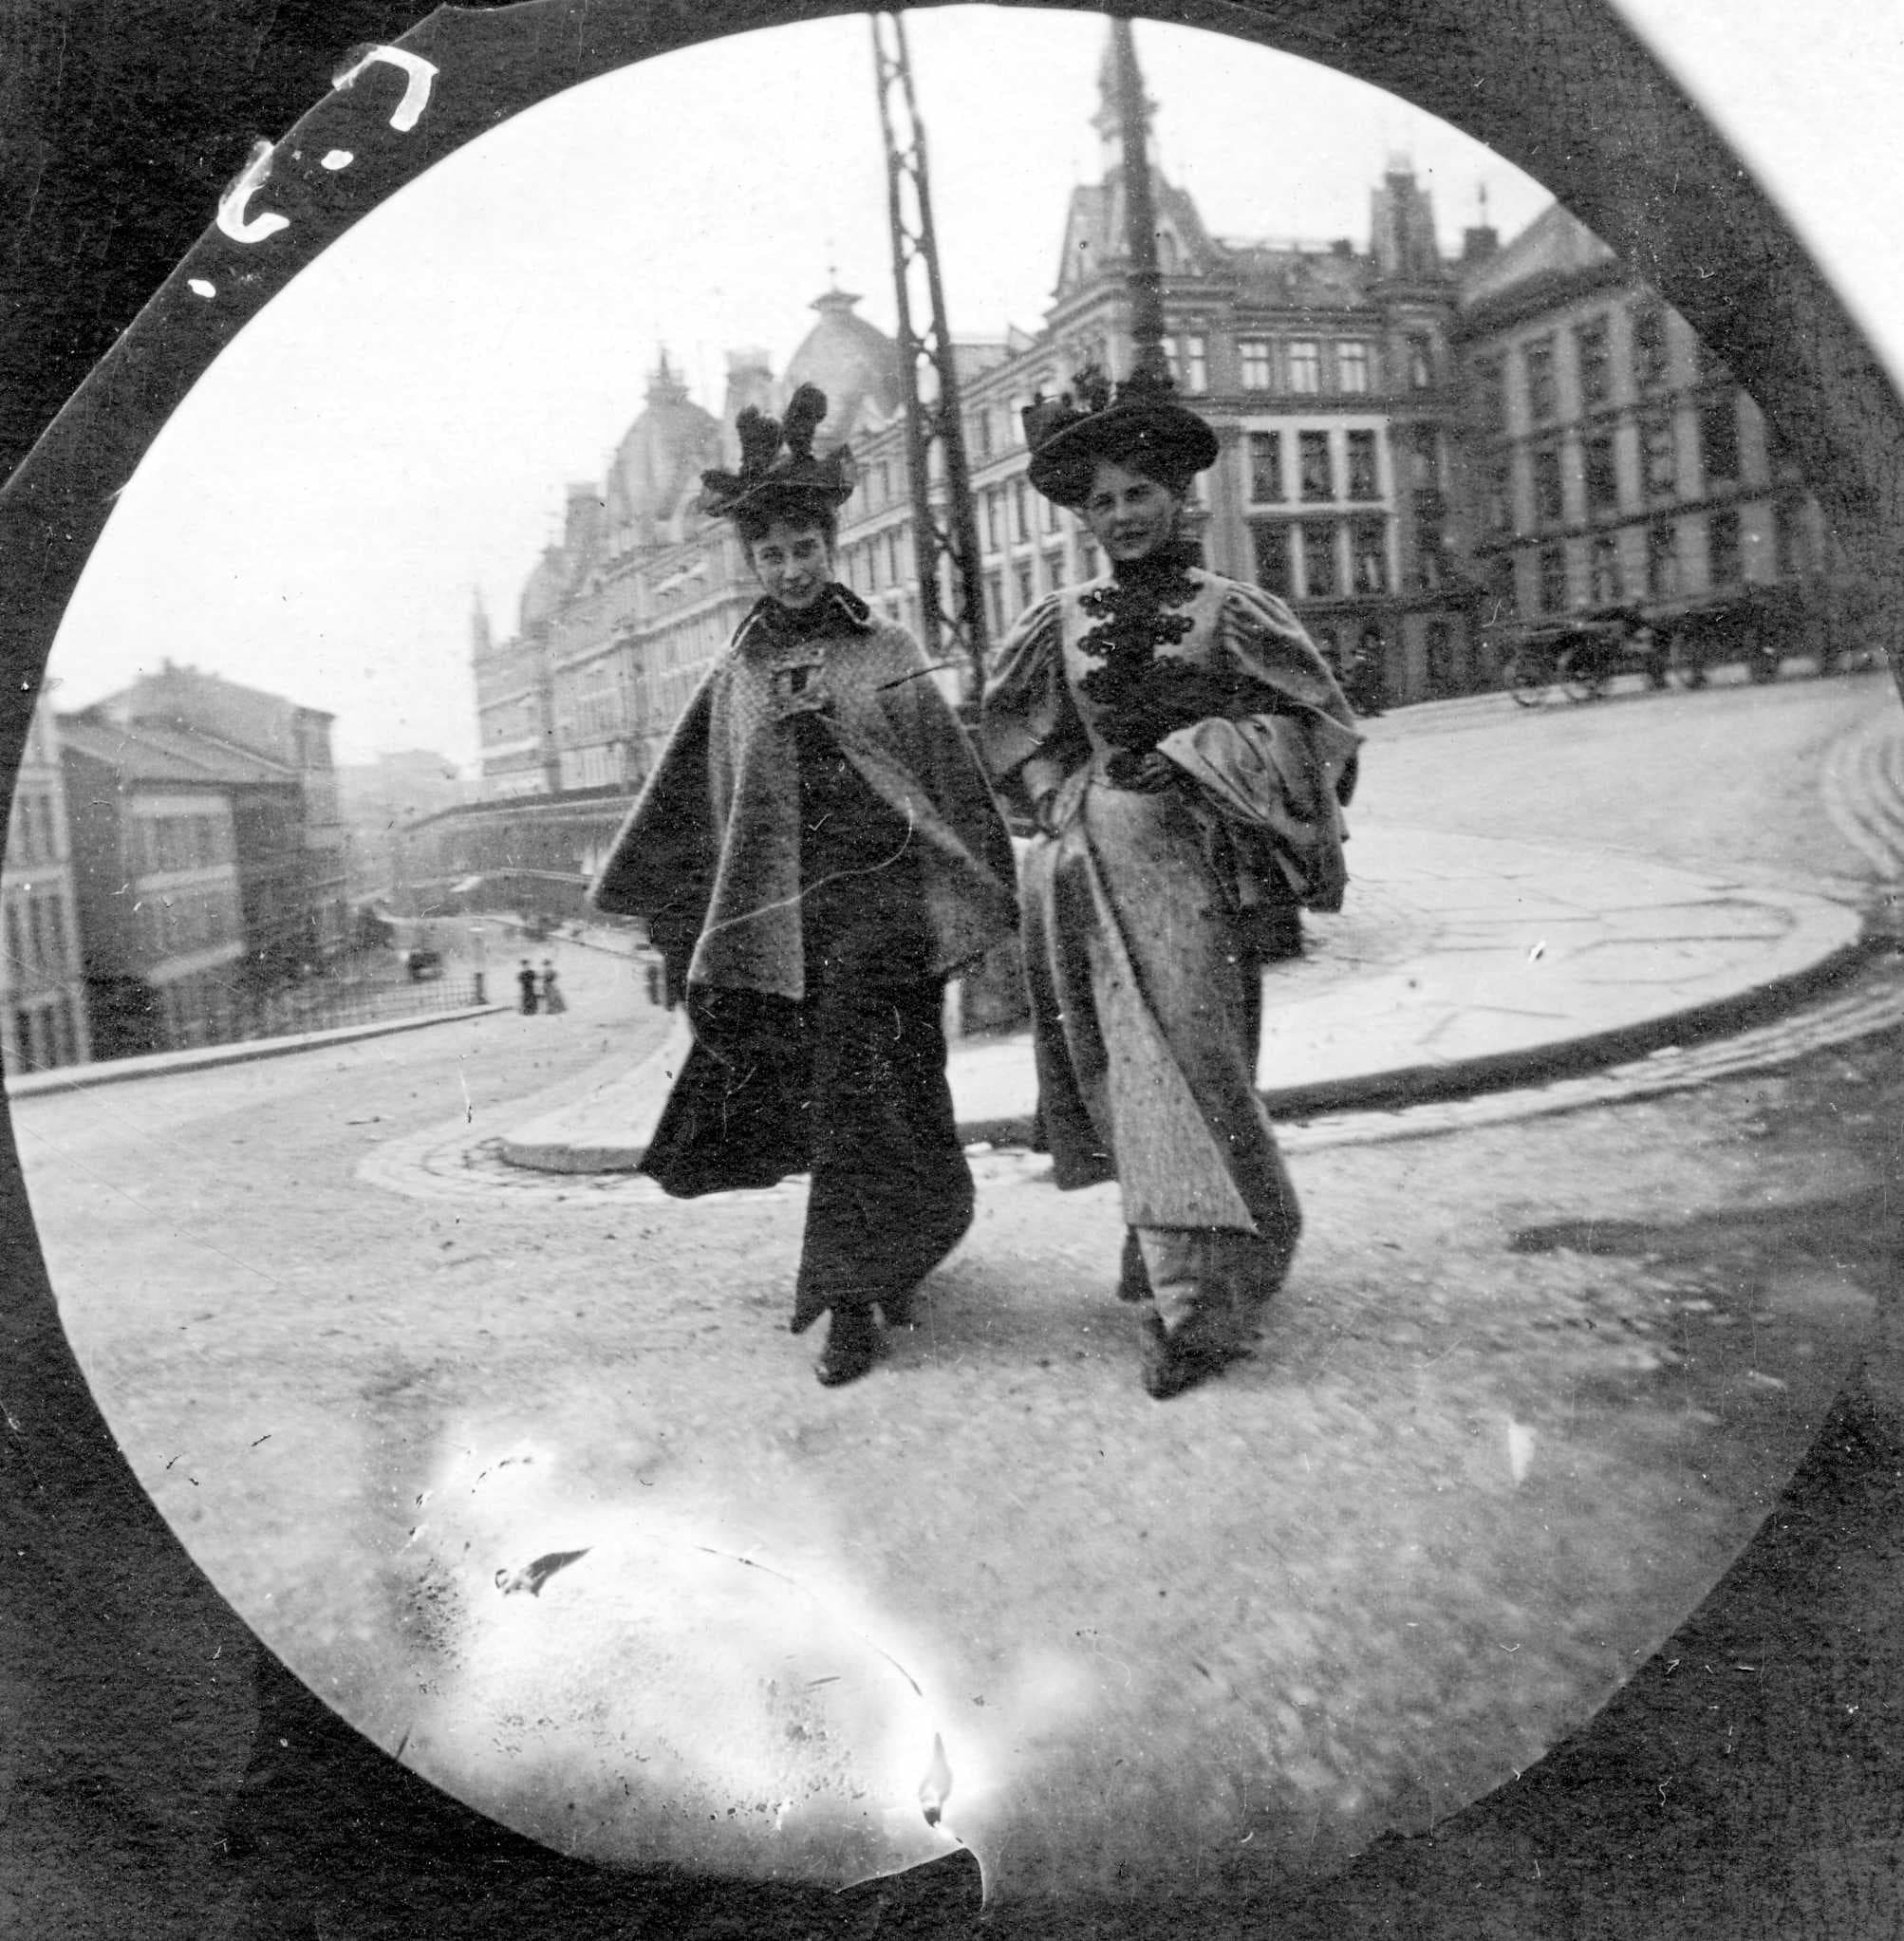 This 19-Year-Old Used a Spy Camera to Take Candid Photos on the Street in the 1890s